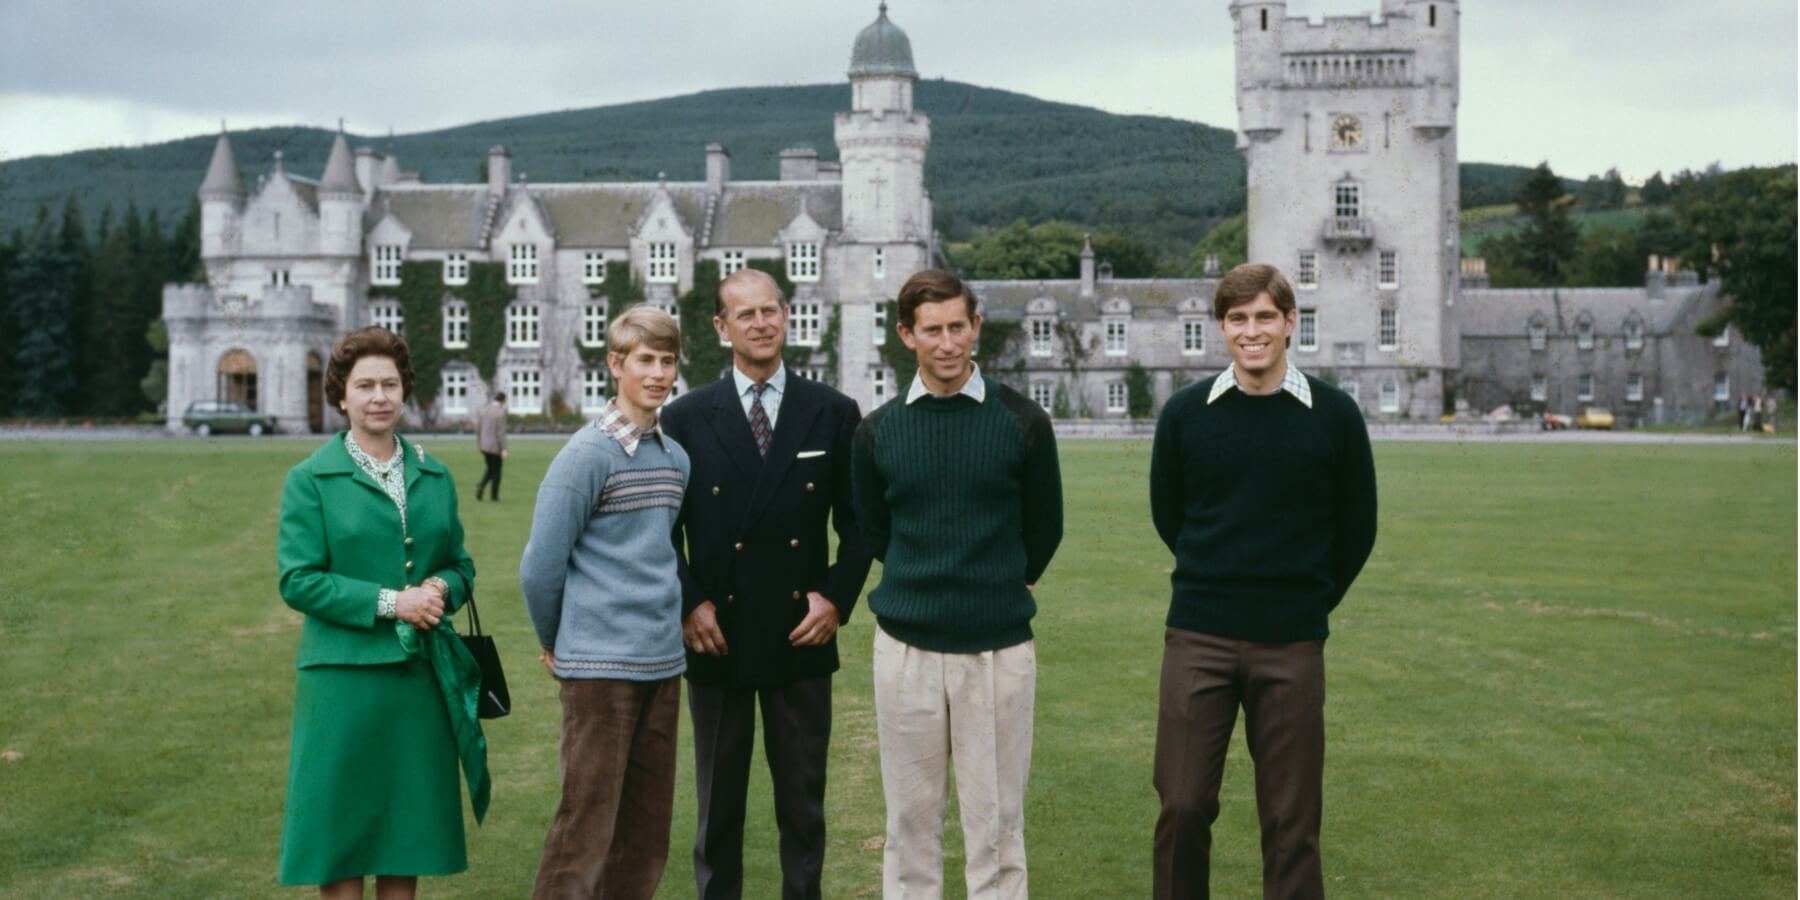 Queen Elizabeth, Prince Andrew, Prince Philip, Prince Charles, and Prince Andrew on the grounds of Balmoral Estate in Scotland.